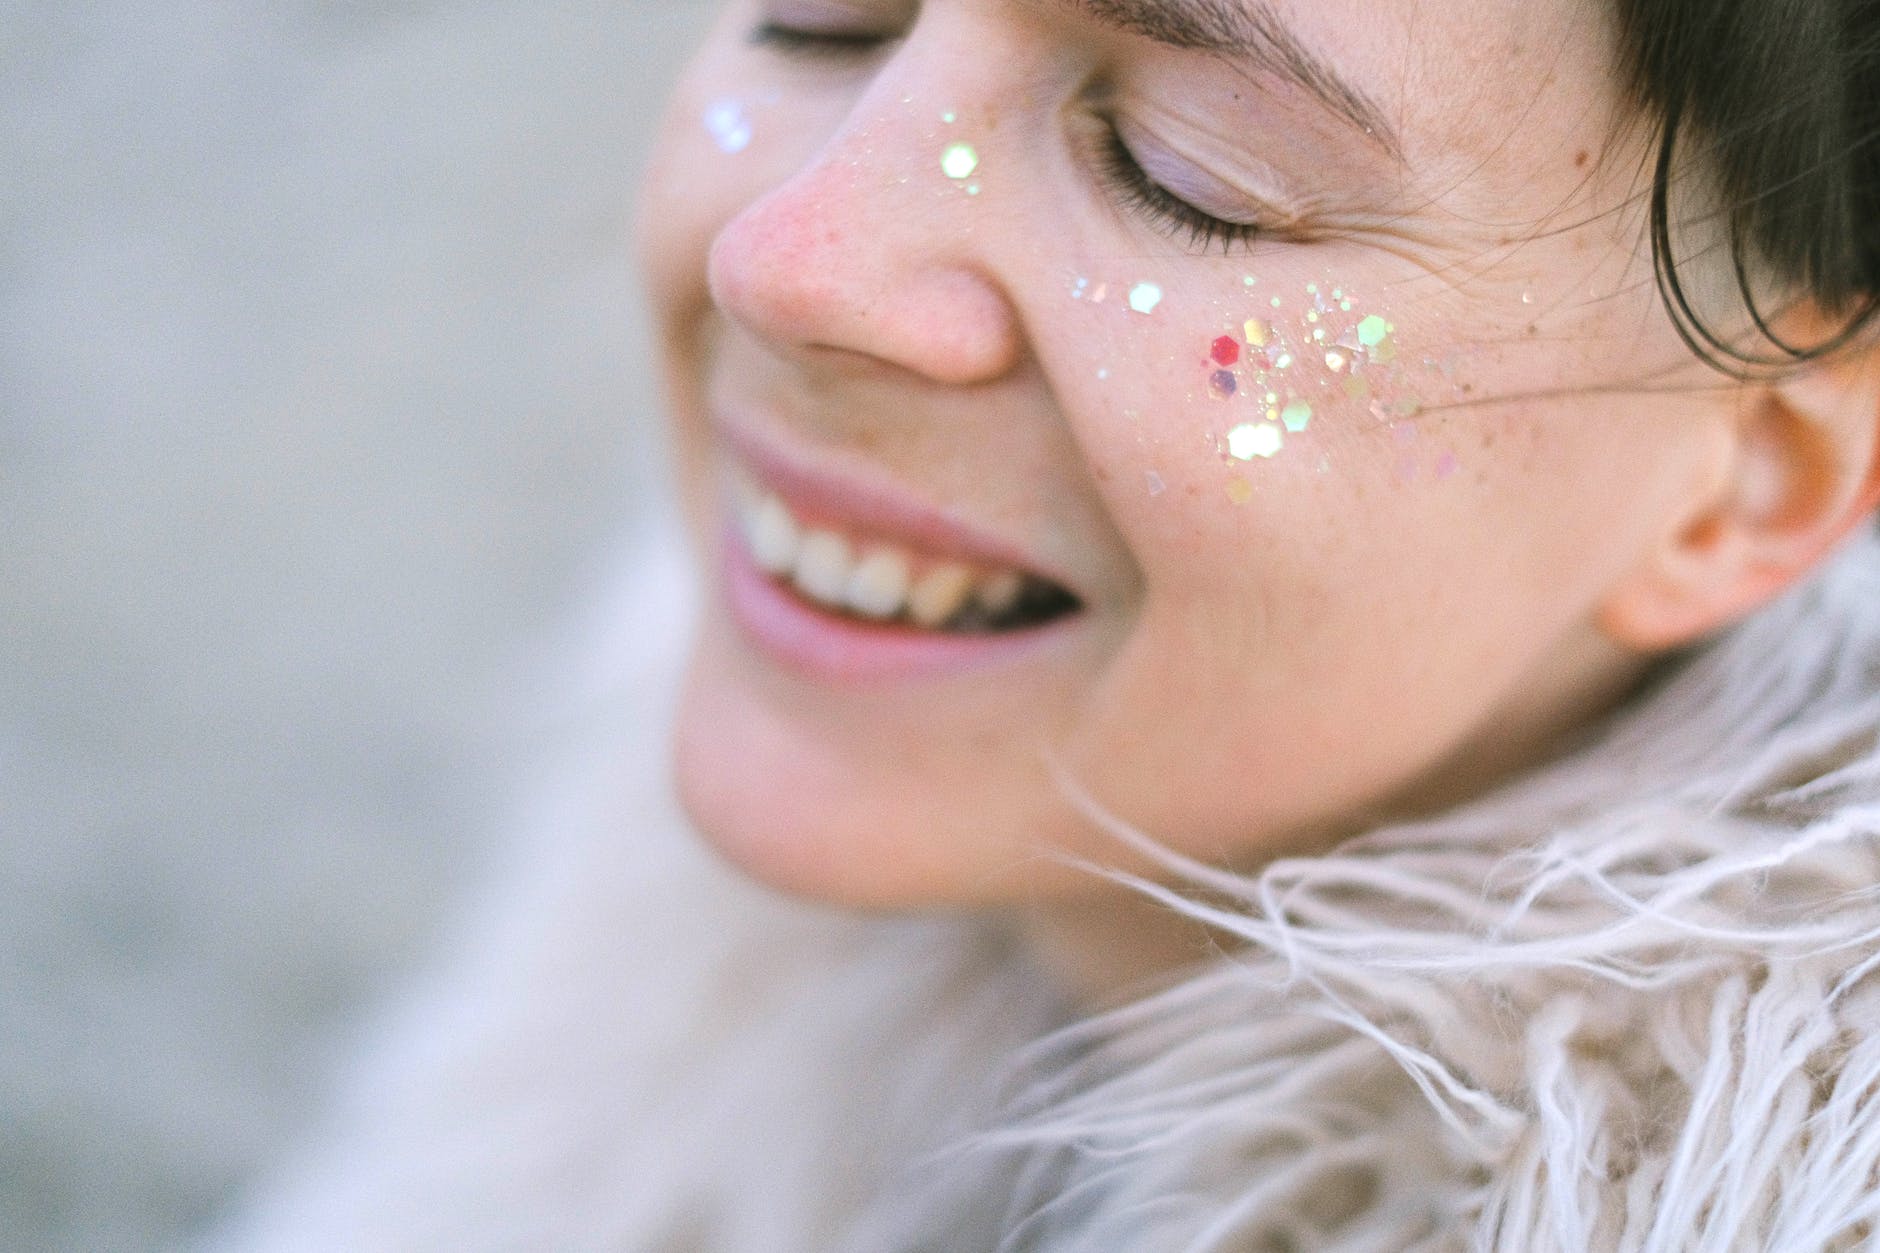 woman with spangles on cheeks laughing